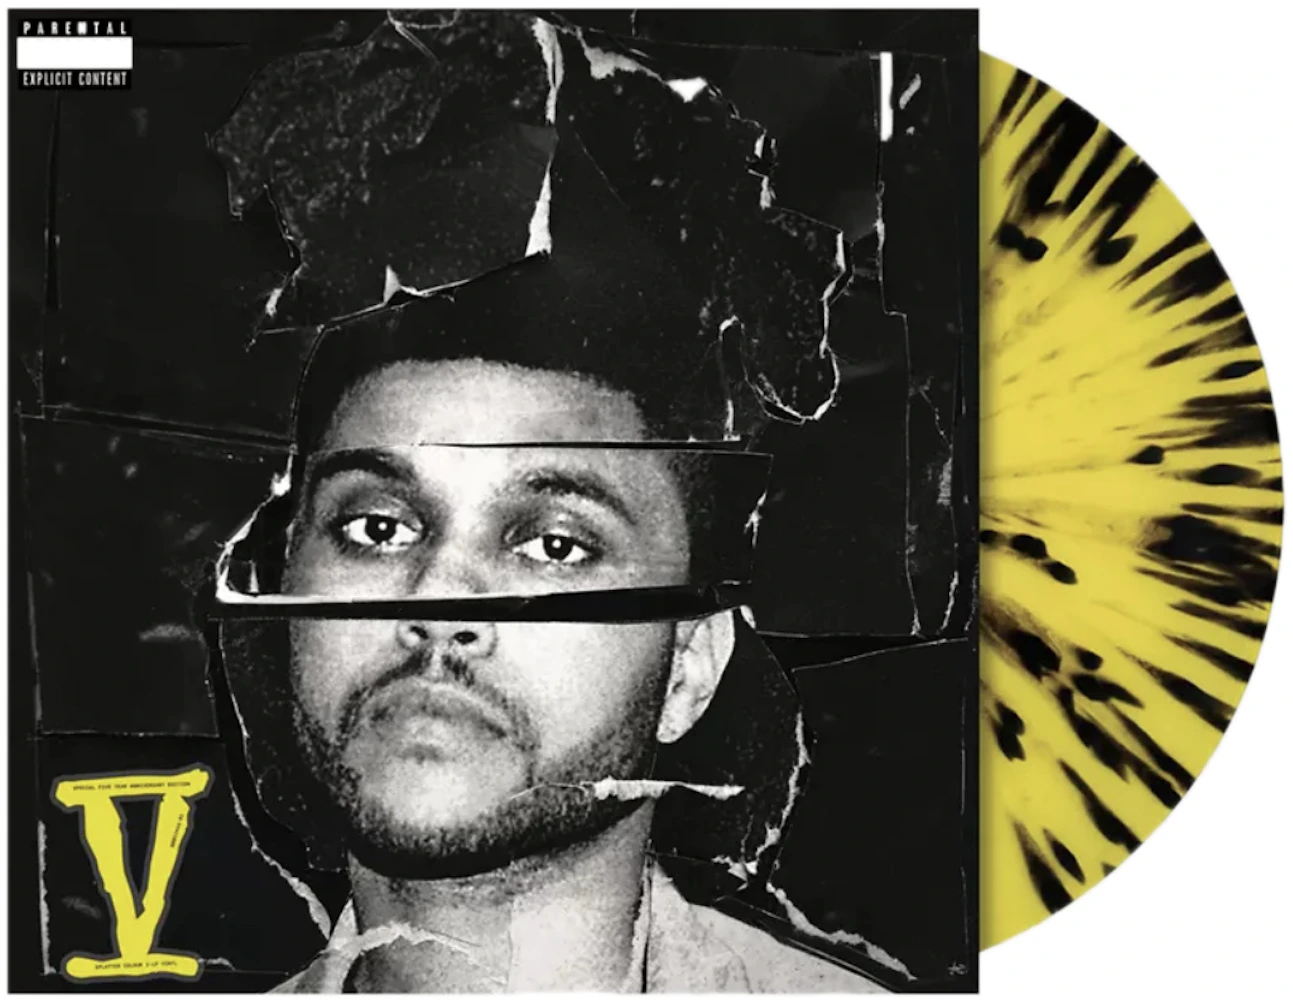 https://images.stockx.com/images/The-Weekend-Beauty-Behind-The-Madness-Limited-Yellow-With-Black-Splatter-2XLP-Vinyl-Yellow-Black.jpg?fit=fill&bg=FFFFFF&w=700&h=500&fm=webp&auto=compress&q=90&dpr=2&trim=color&updated_at=1618848170